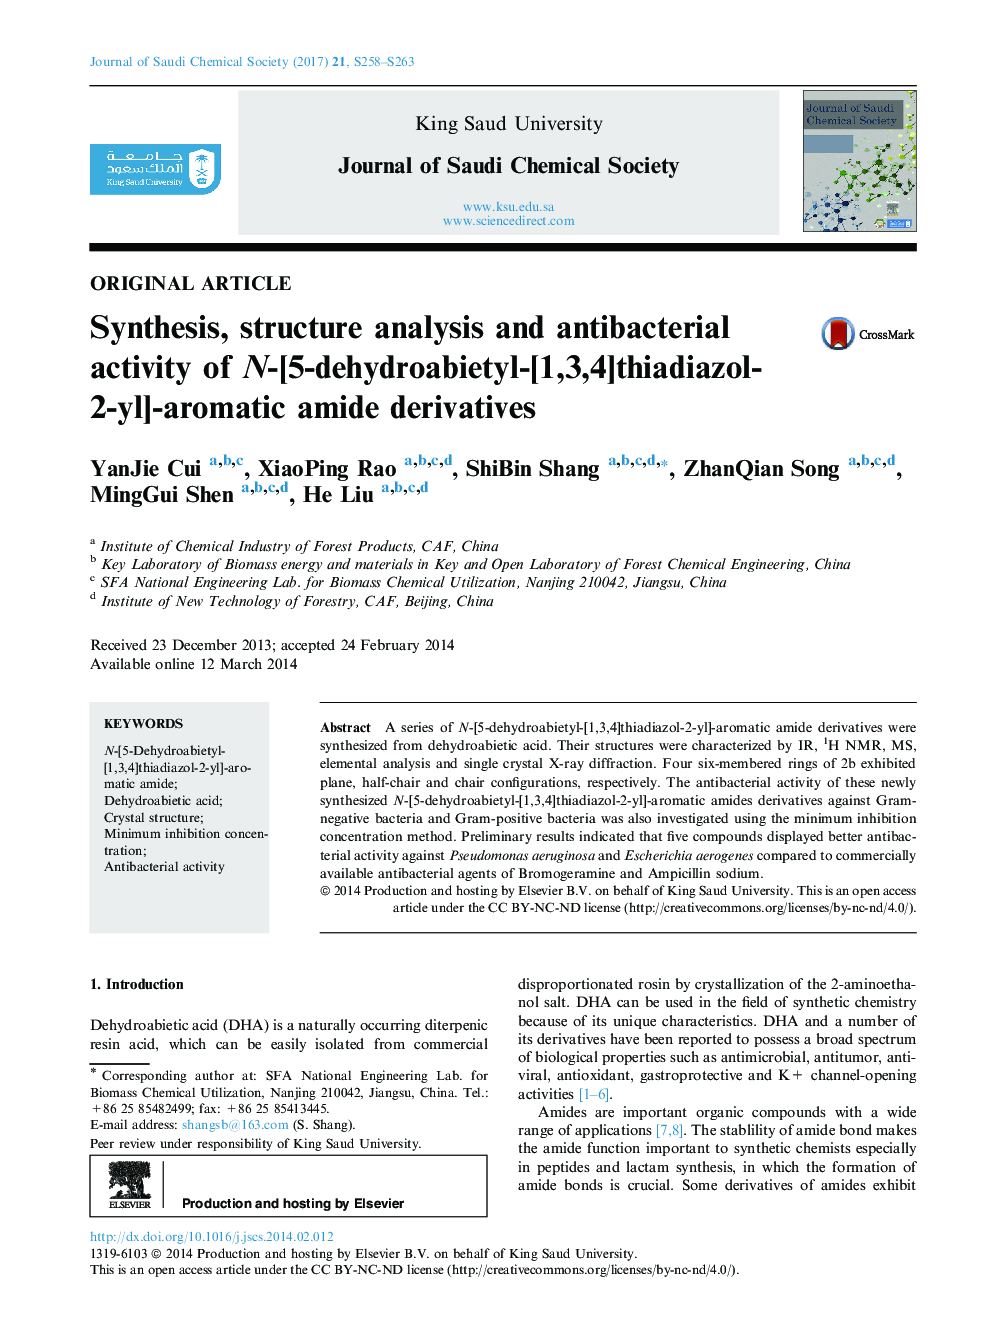 Synthesis, structure analysis and antibacterial activity of N-[5-dehydroabietyl-[1,3,4]thiadiazol-2-yl]-aromatic amide derivatives